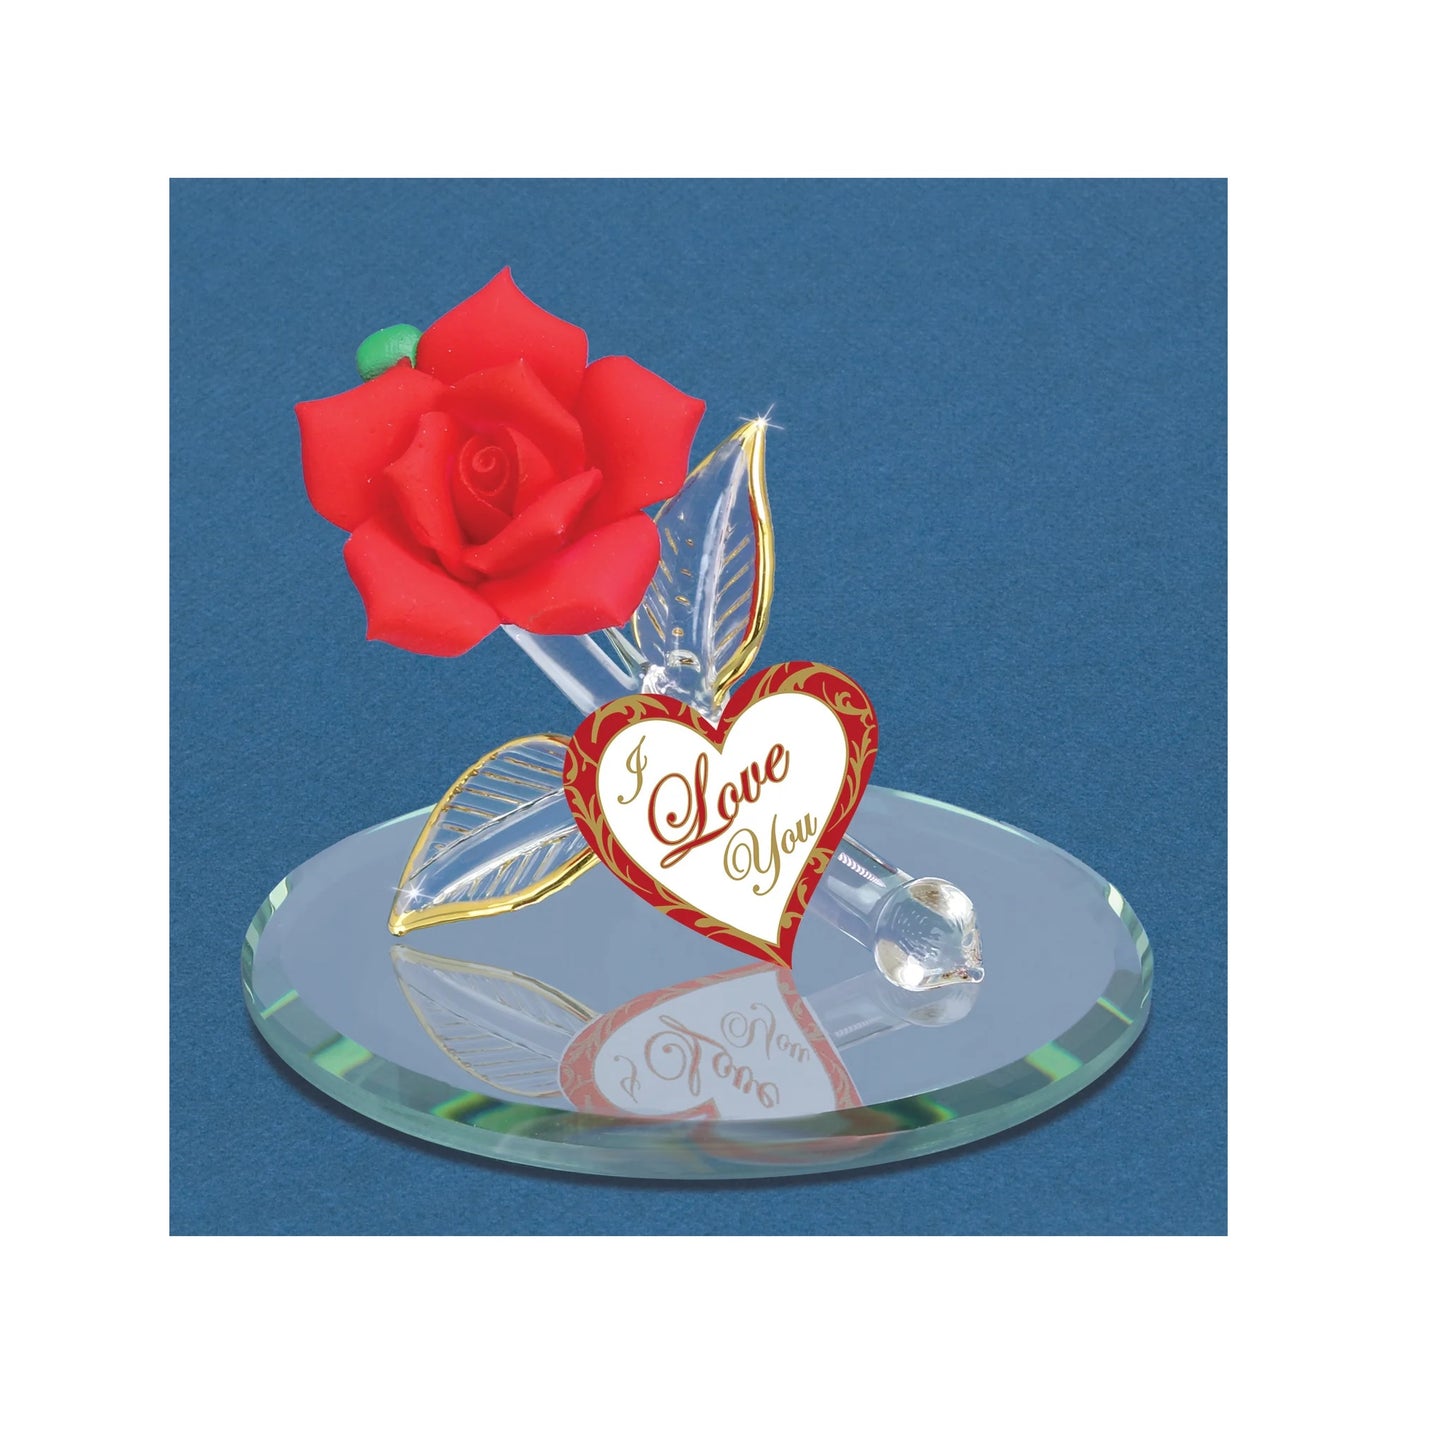 Glass Baron "i Love You" Red Rose